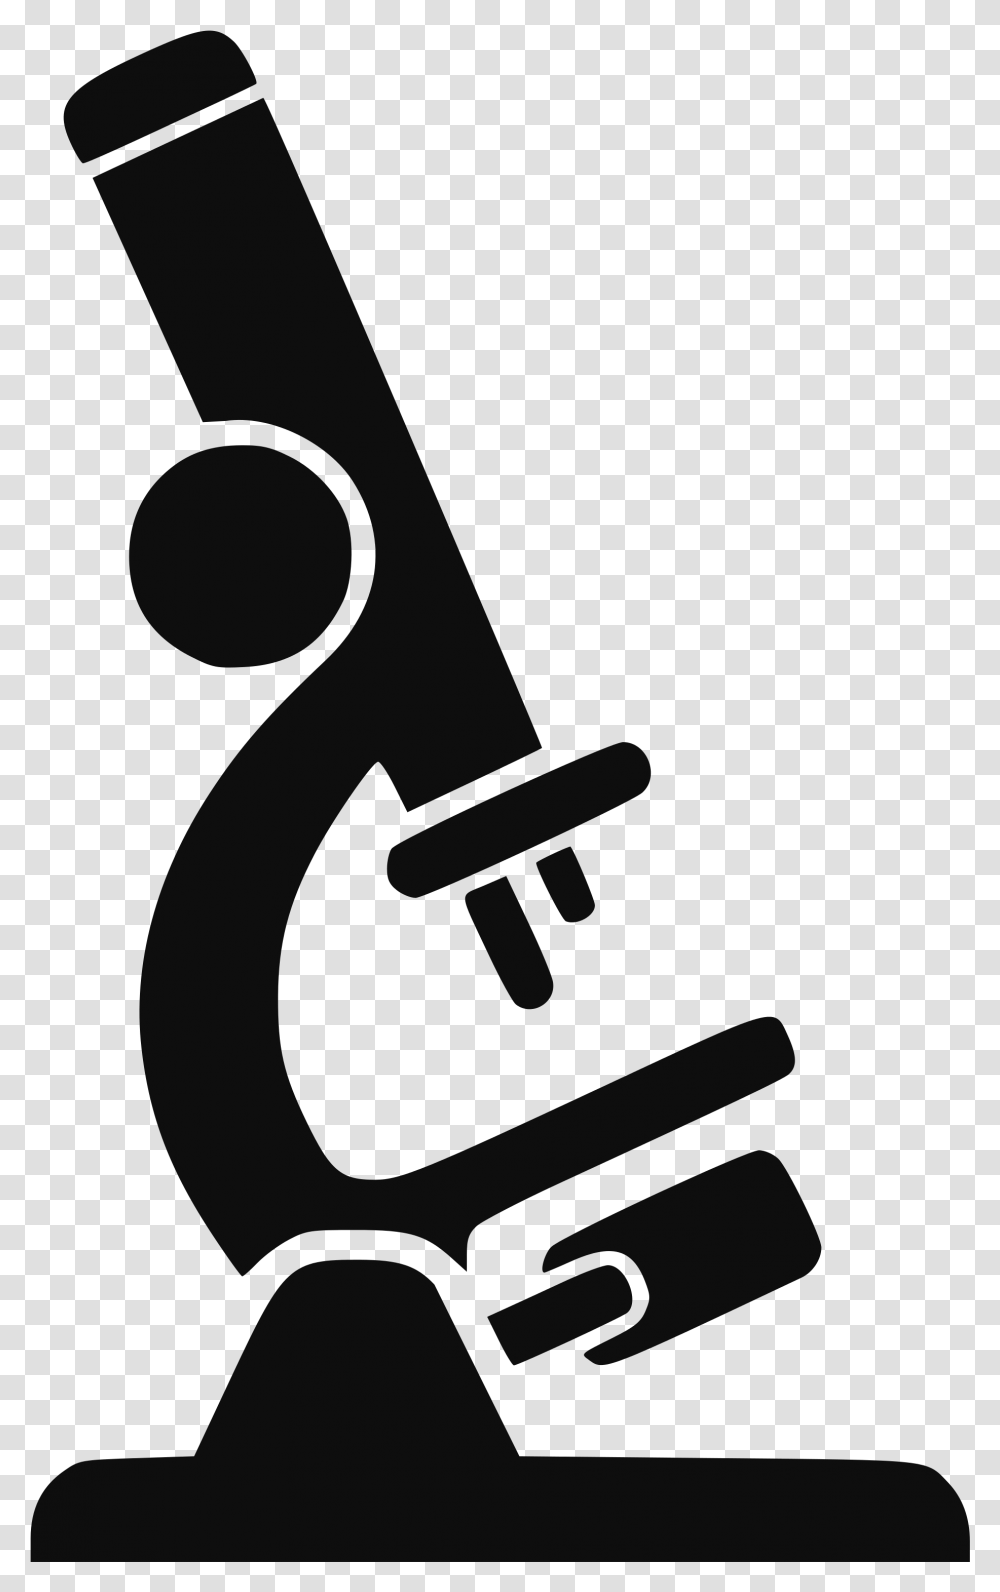 Microscope Clipart Black And White Microscope Black Microscope Black And White Clipart, Alphabet, Ampersand Transparent Png